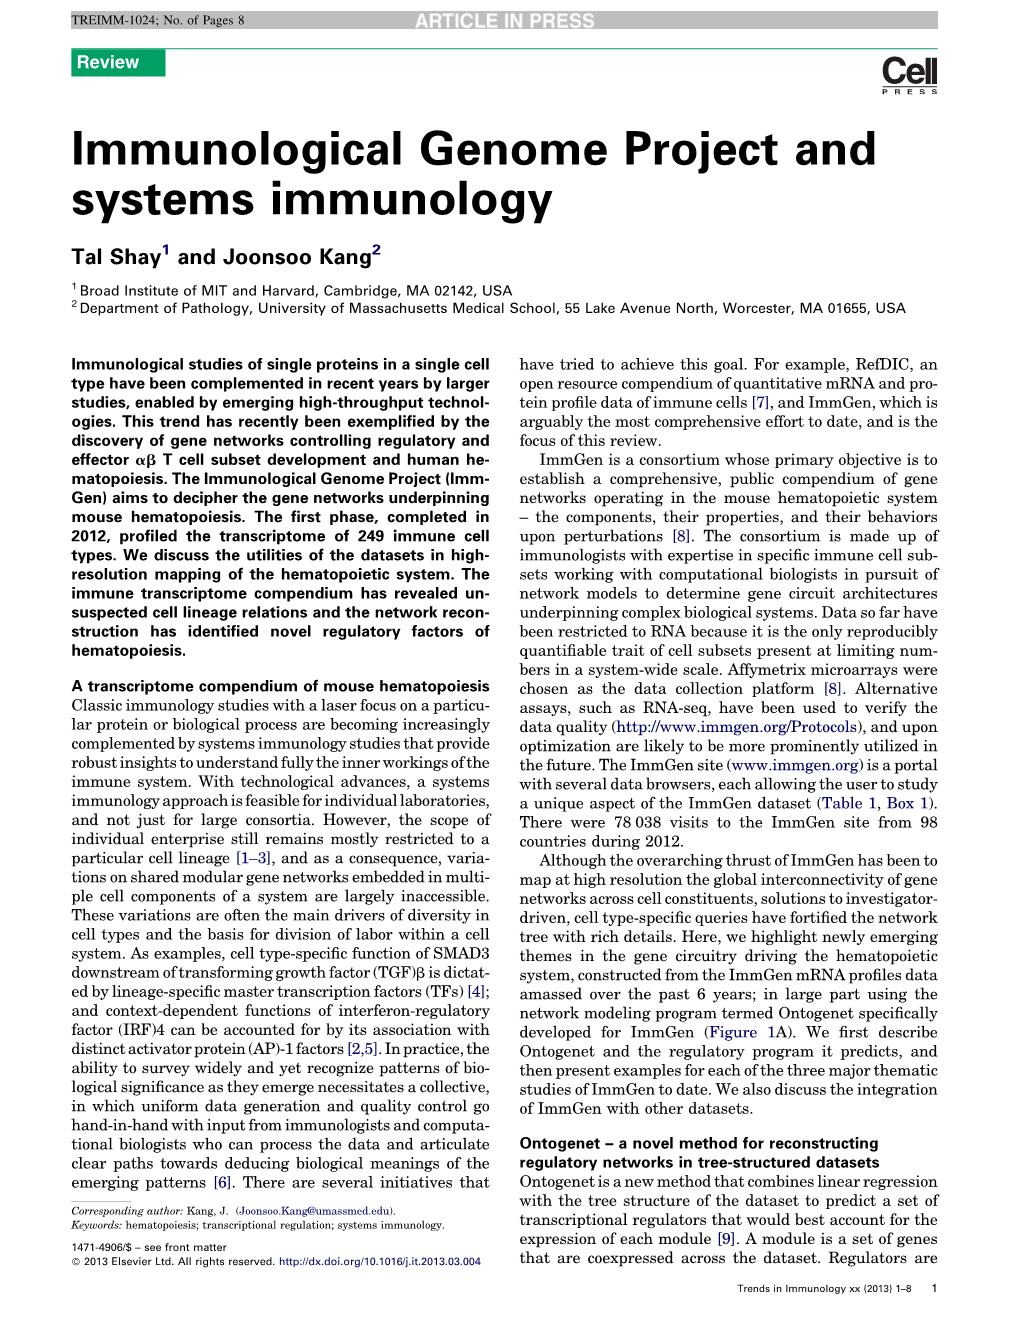 Immunological Genome Project and Systems Immunology